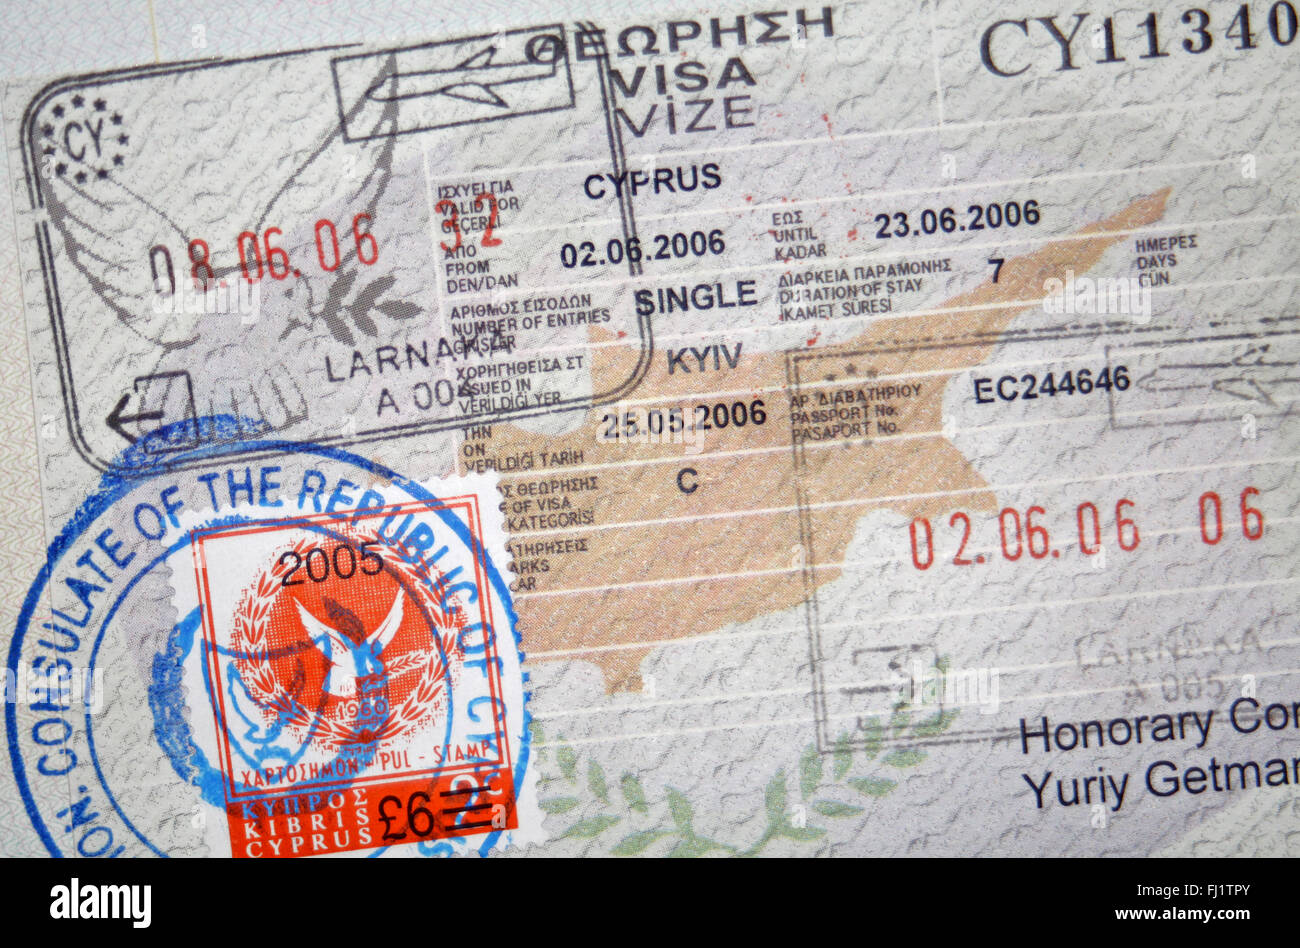 Page of passport with Cyprus visa and stamps Stock Photo